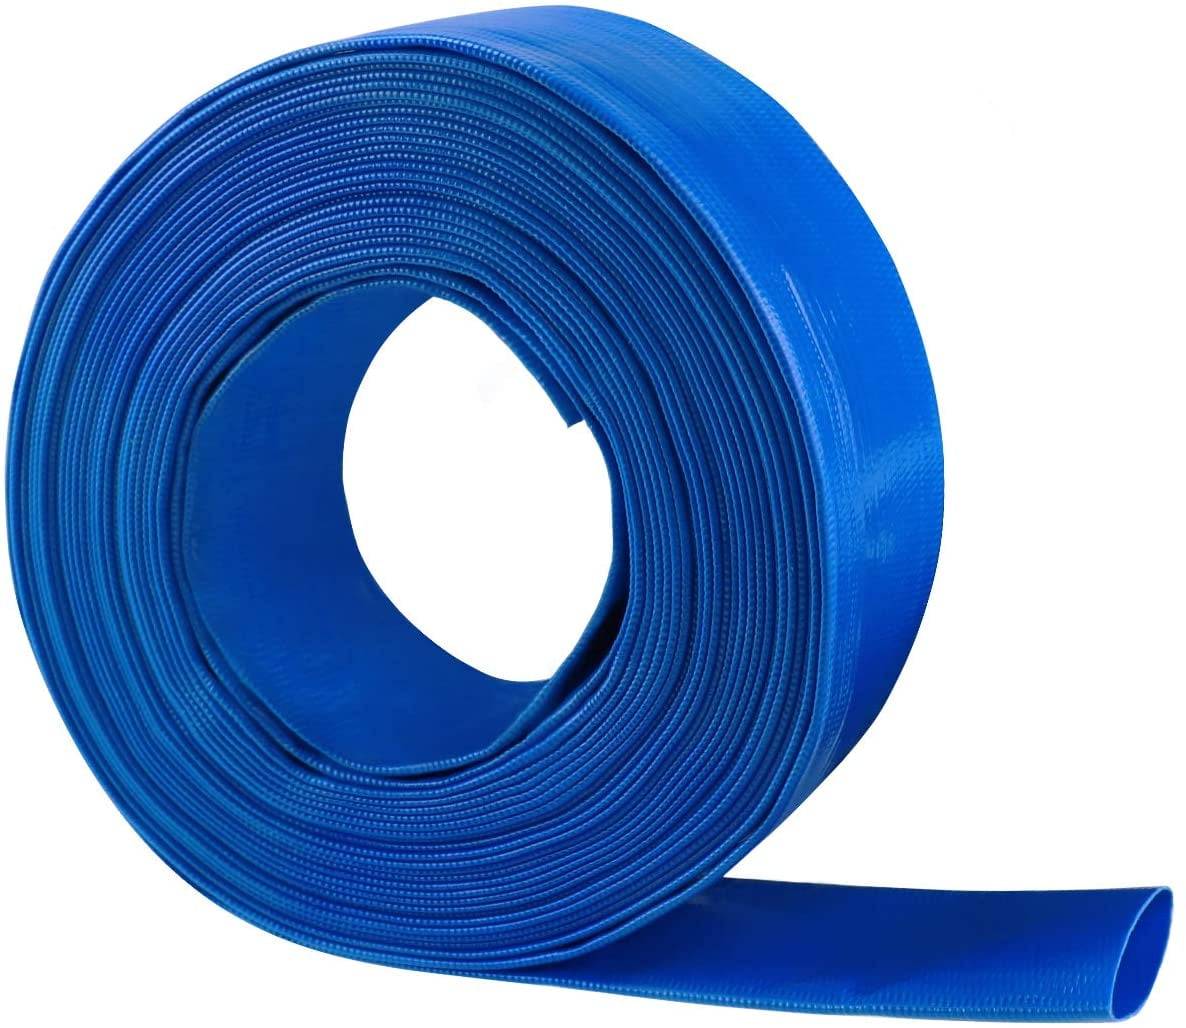 Blue PVC Backwash Hose BISupply 1” in by 100’ FT Flat Lay Sump Pump Discharge Hose Discharge Hose 